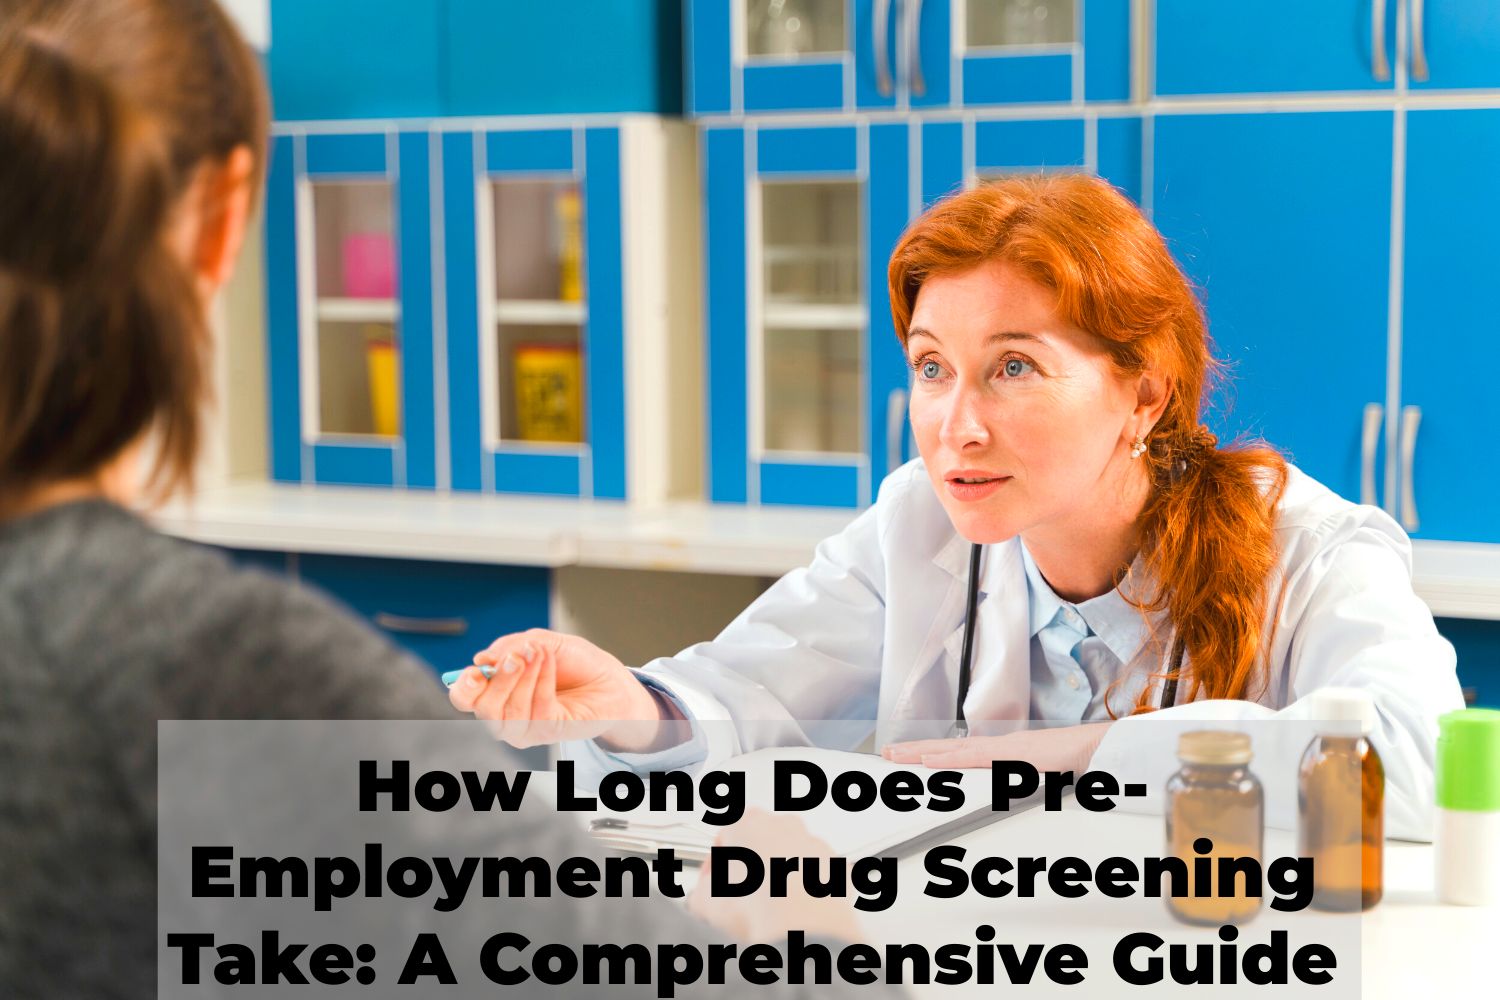 How Long Does Pre-Employment Drug Screening Take